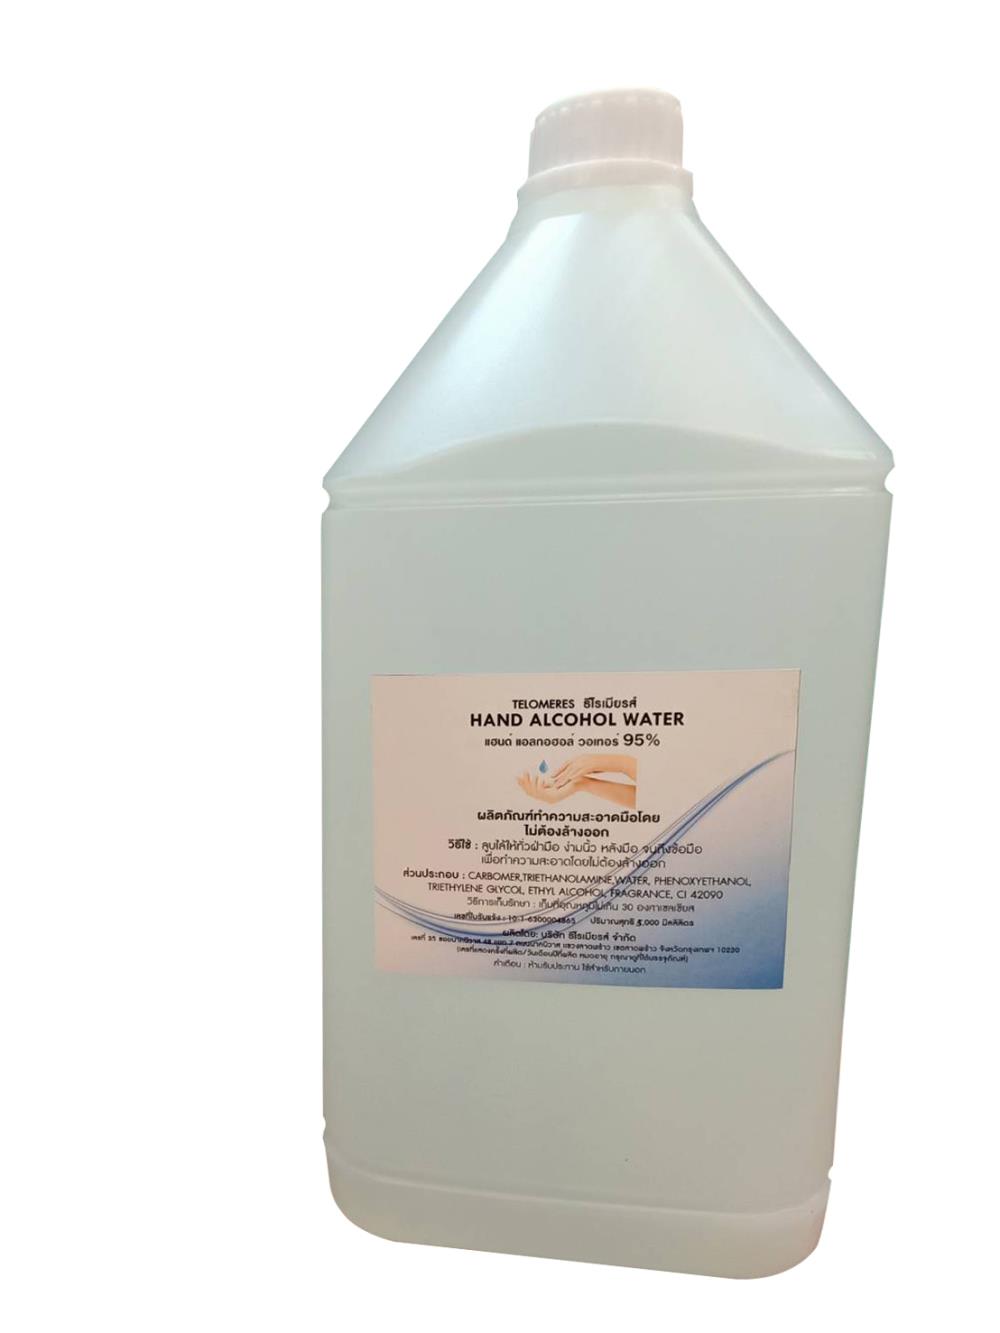 Hand Alcohol Water 95%,Hand Alcohol Water,TELOMERES,Chemicals/Alcohols